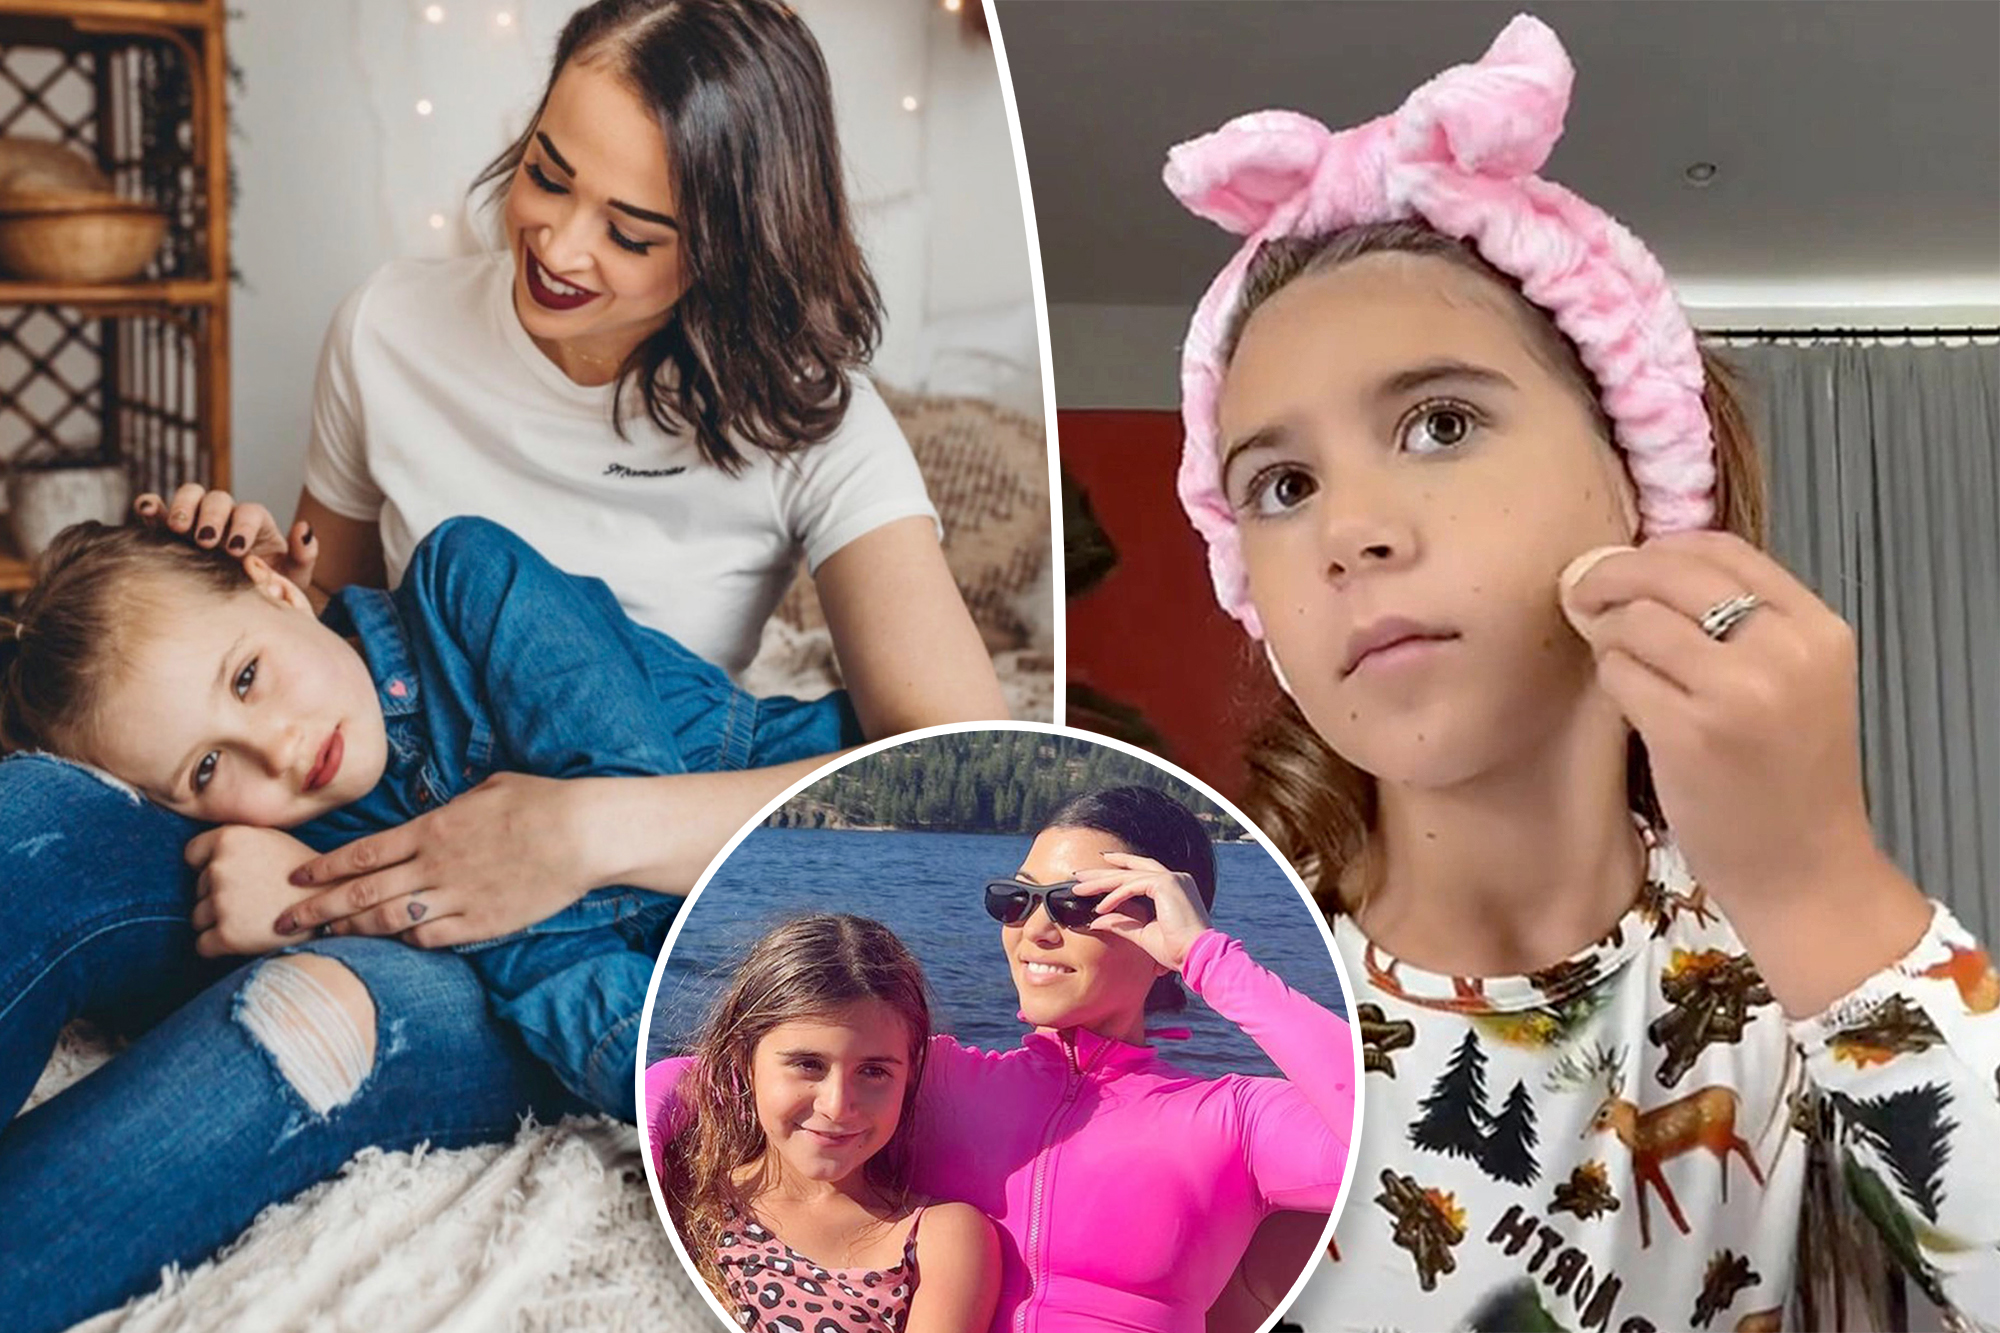 After Kourtney Kardashian, 43, received backlash for allowing 10-year-old daughter Penelope Disick to apply makeup on TikTok, moms say that letting kids experiment with cosmetics is totally harmless.